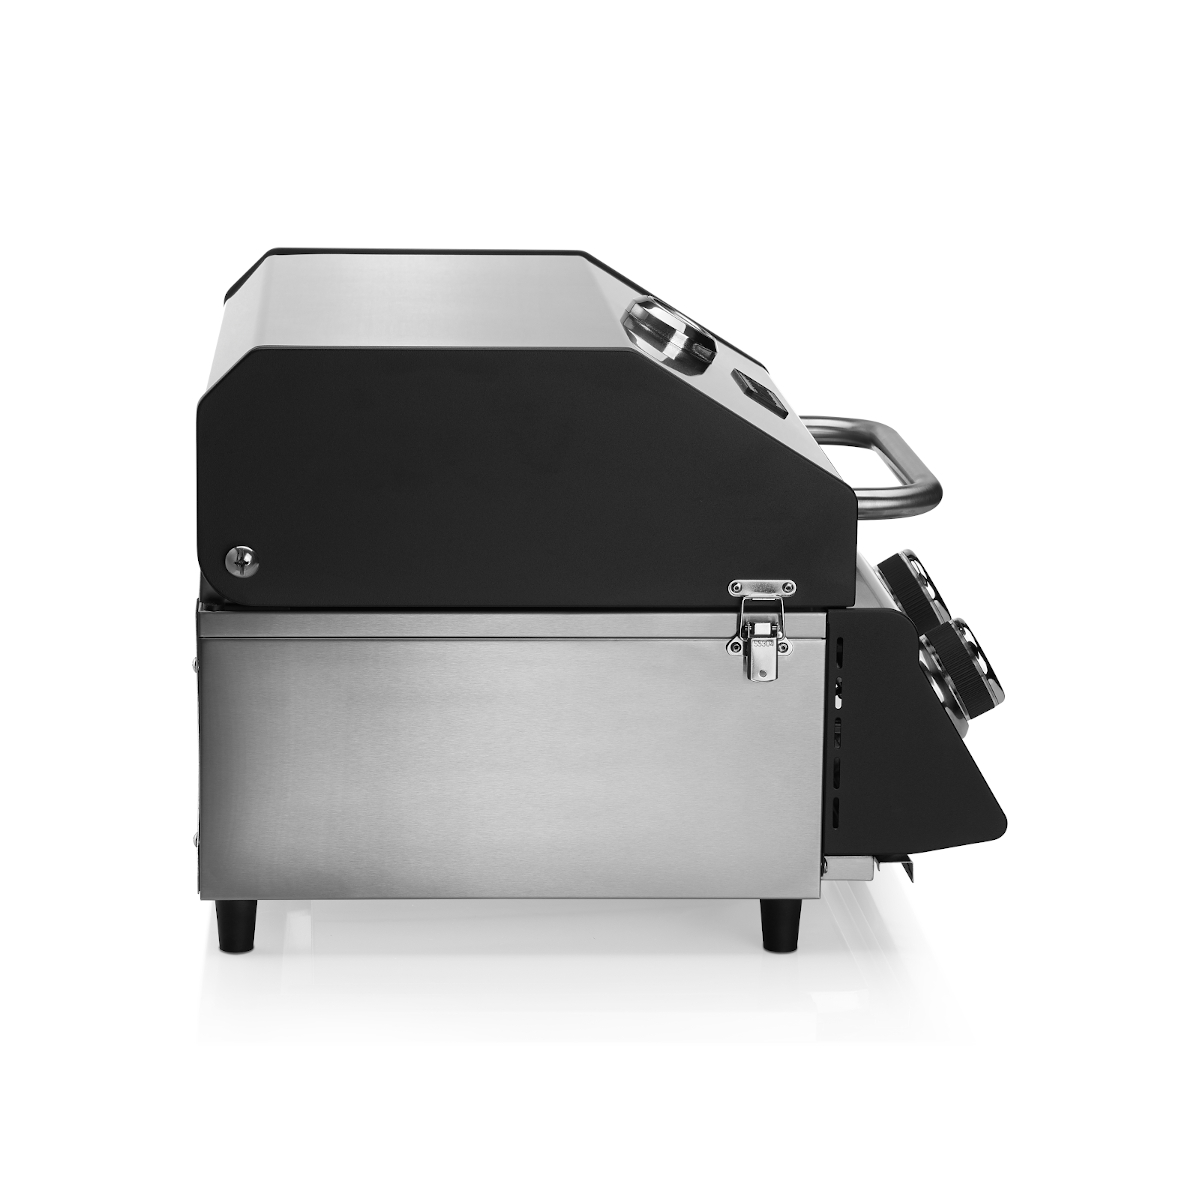 TAINO (4,4 COMPACT 2.0 Silber kW) Gasgrill, S